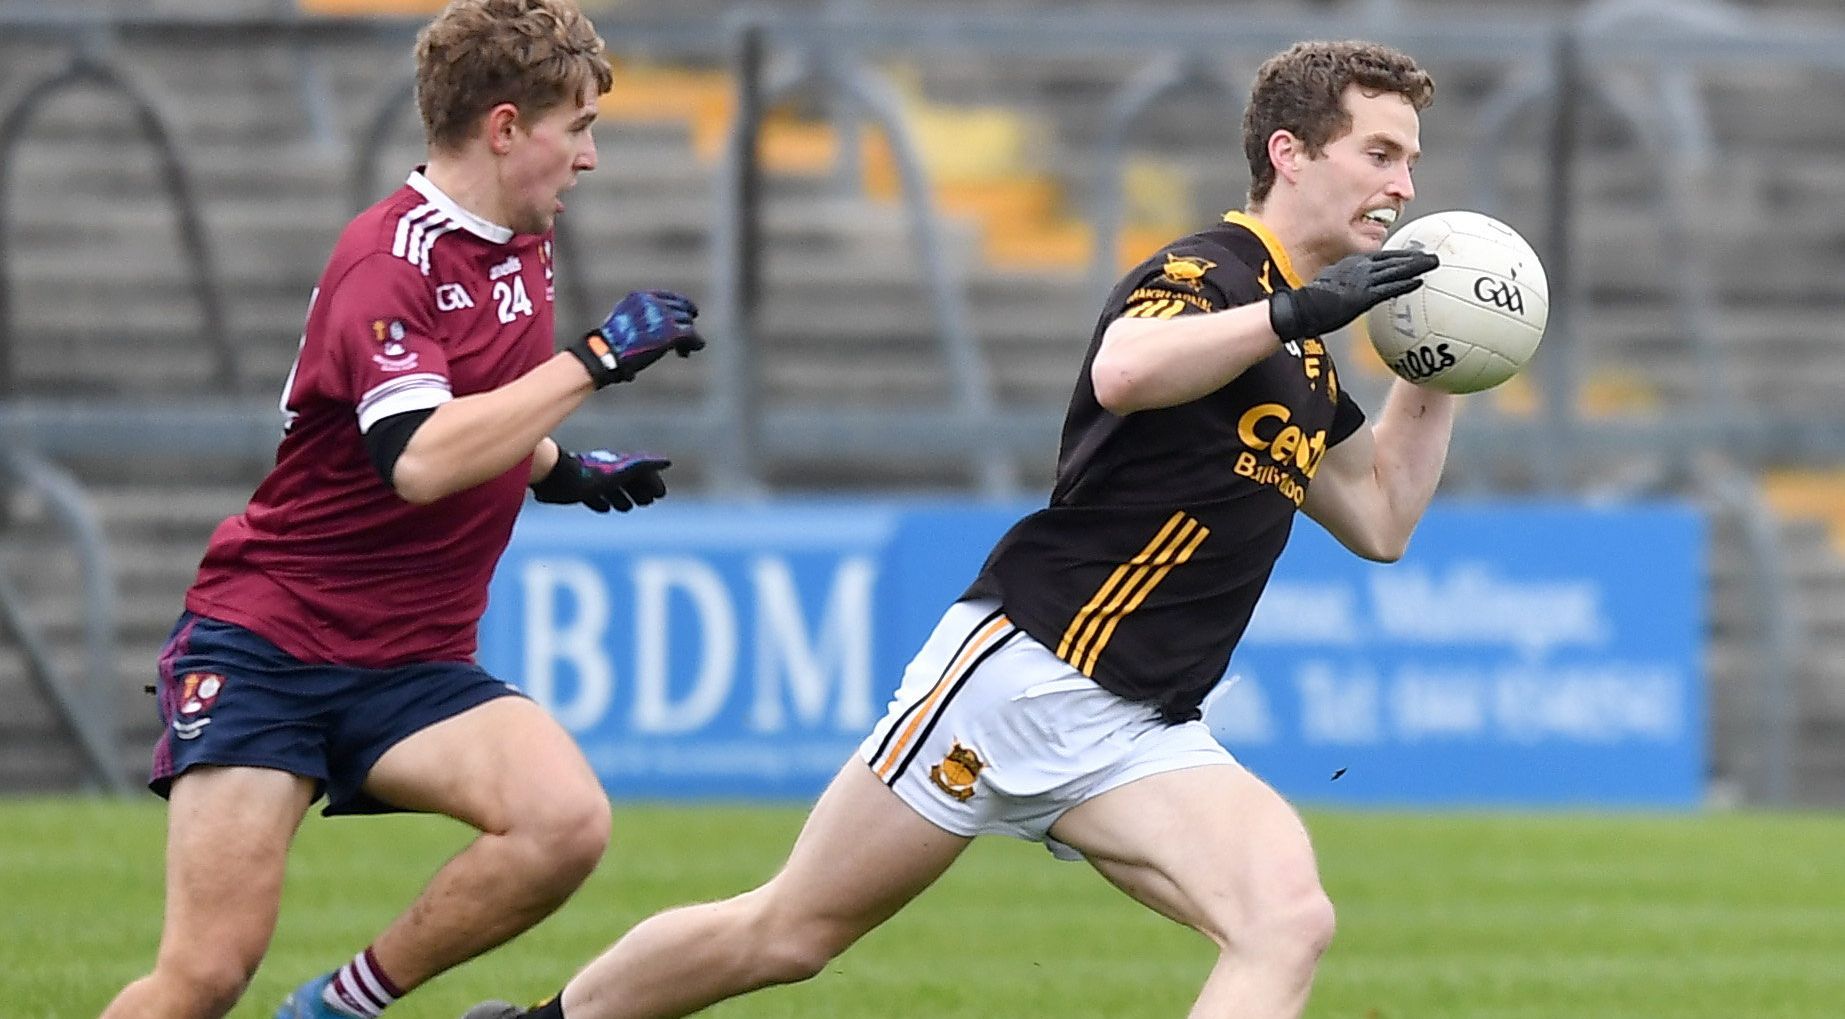 Adamstown ace it in extra-time to reach Leinster Club Junior football